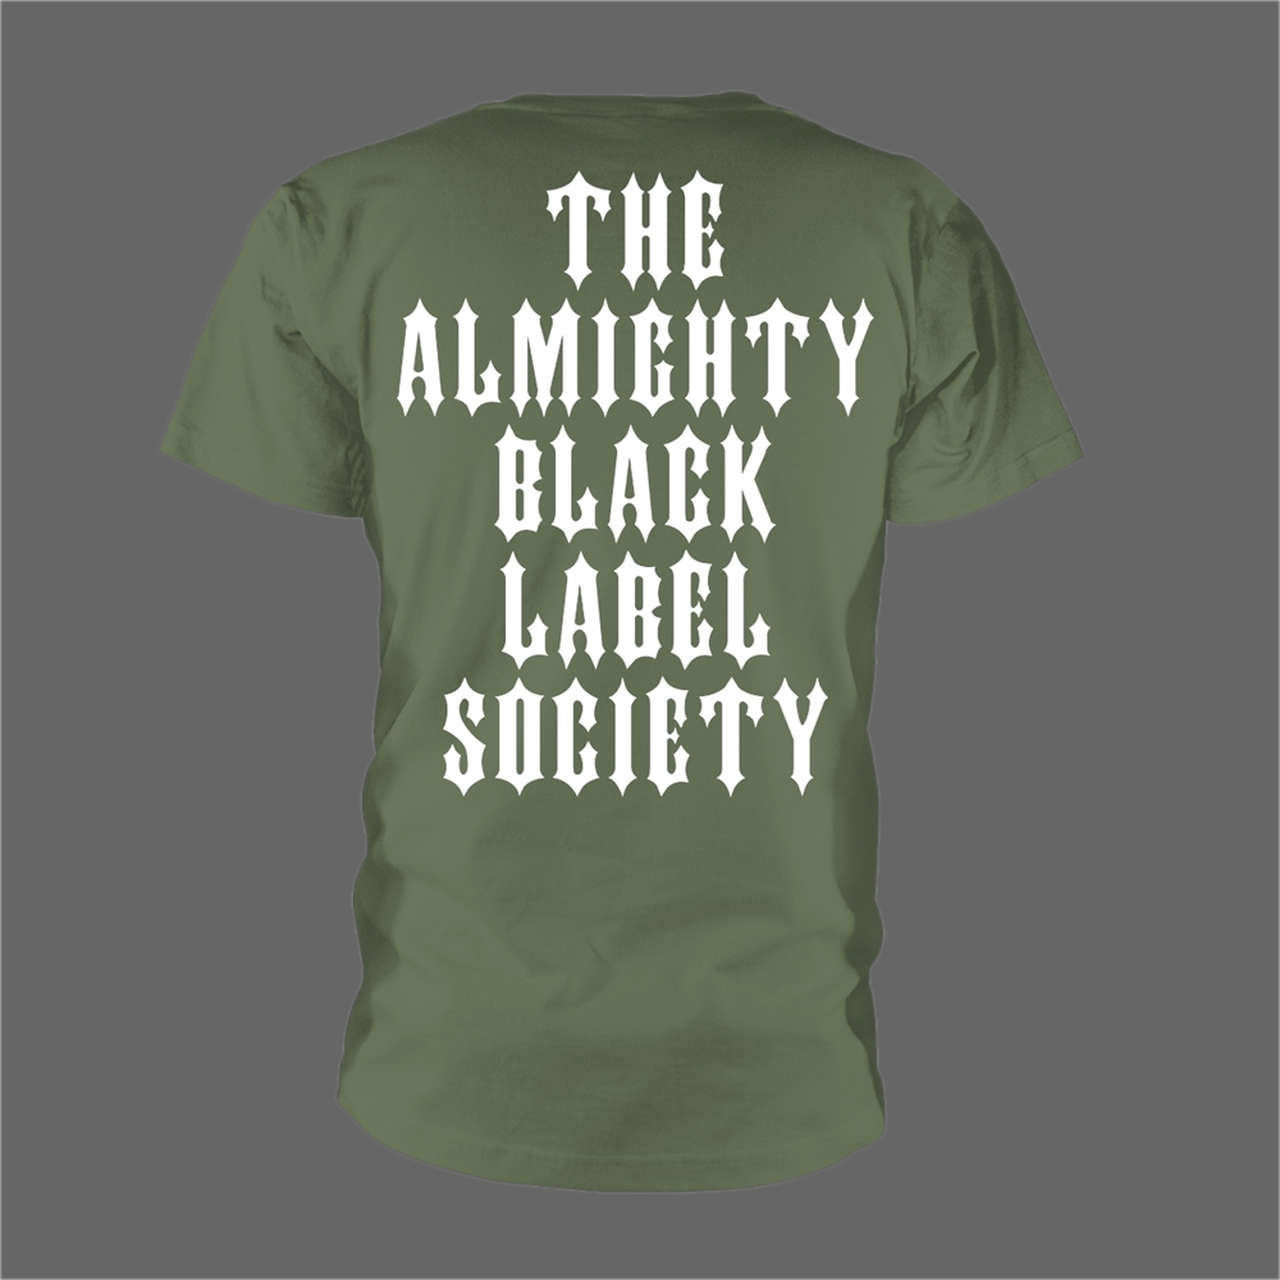 Black Label Society - The Almighty (Olive) (T-Shirt)